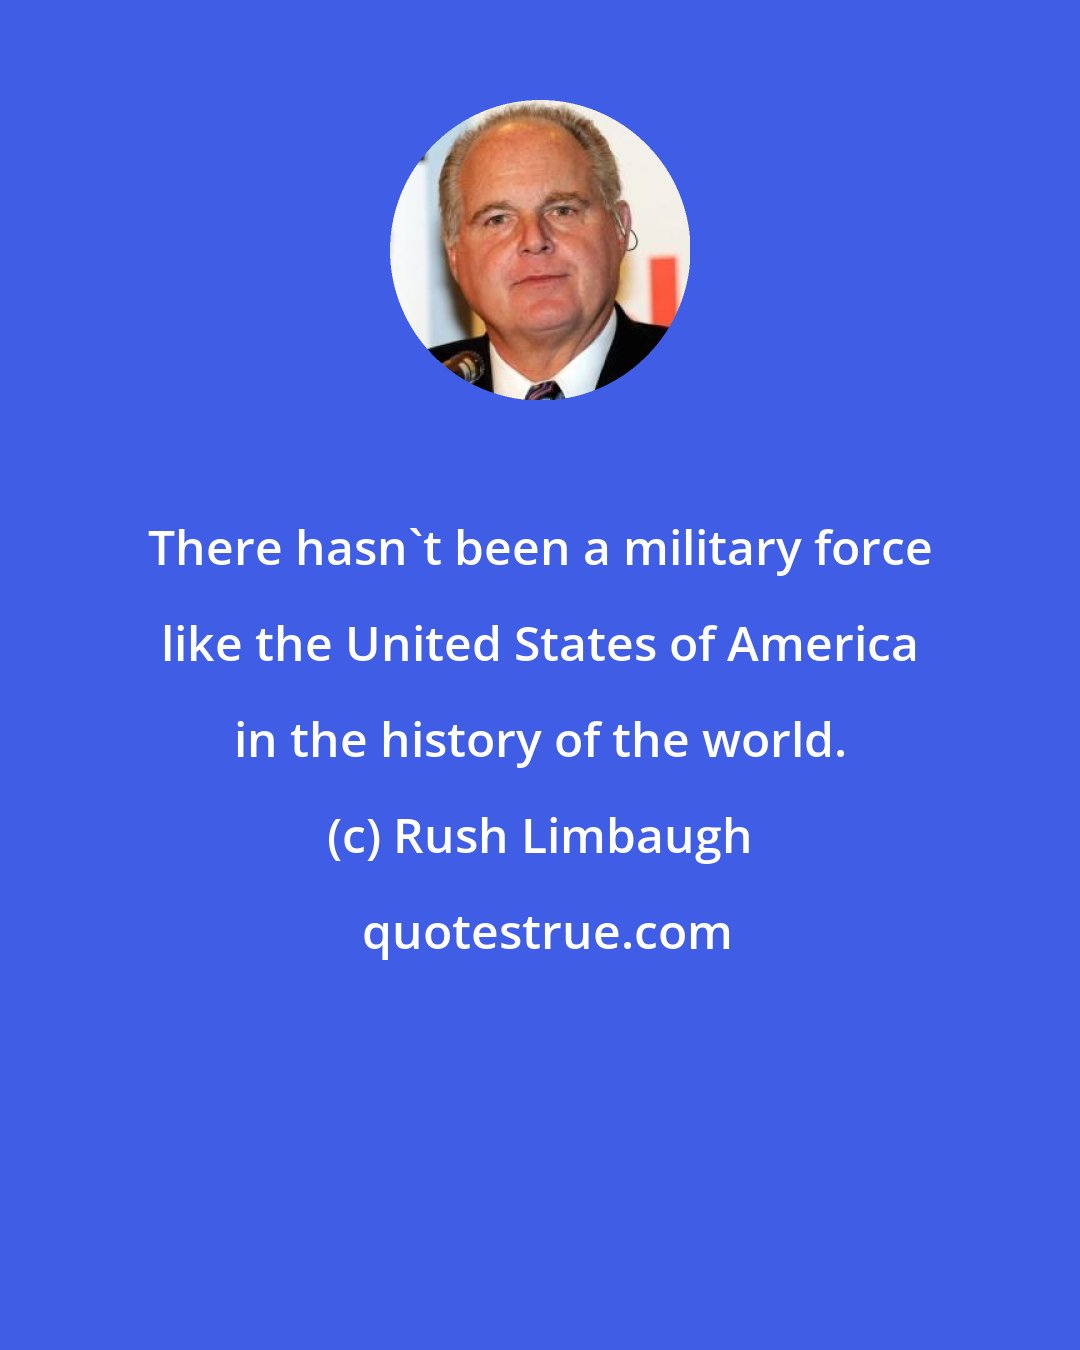 Rush Limbaugh: There hasn't been a military force like the United States of America in the history of the world.